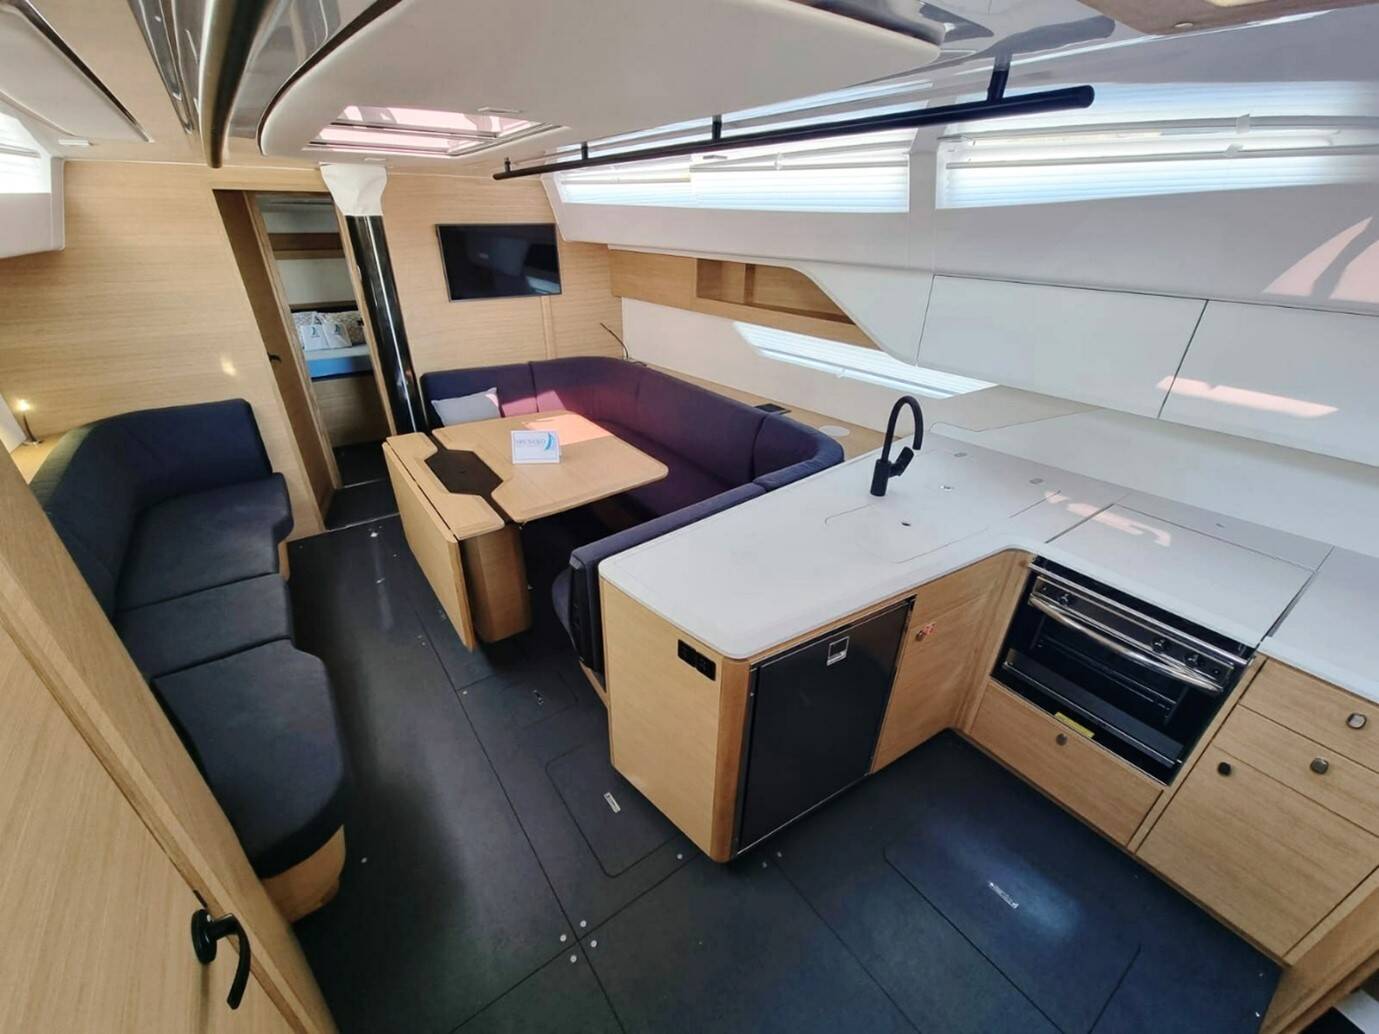 Below the deck: Look on the Saloon of Elan E6